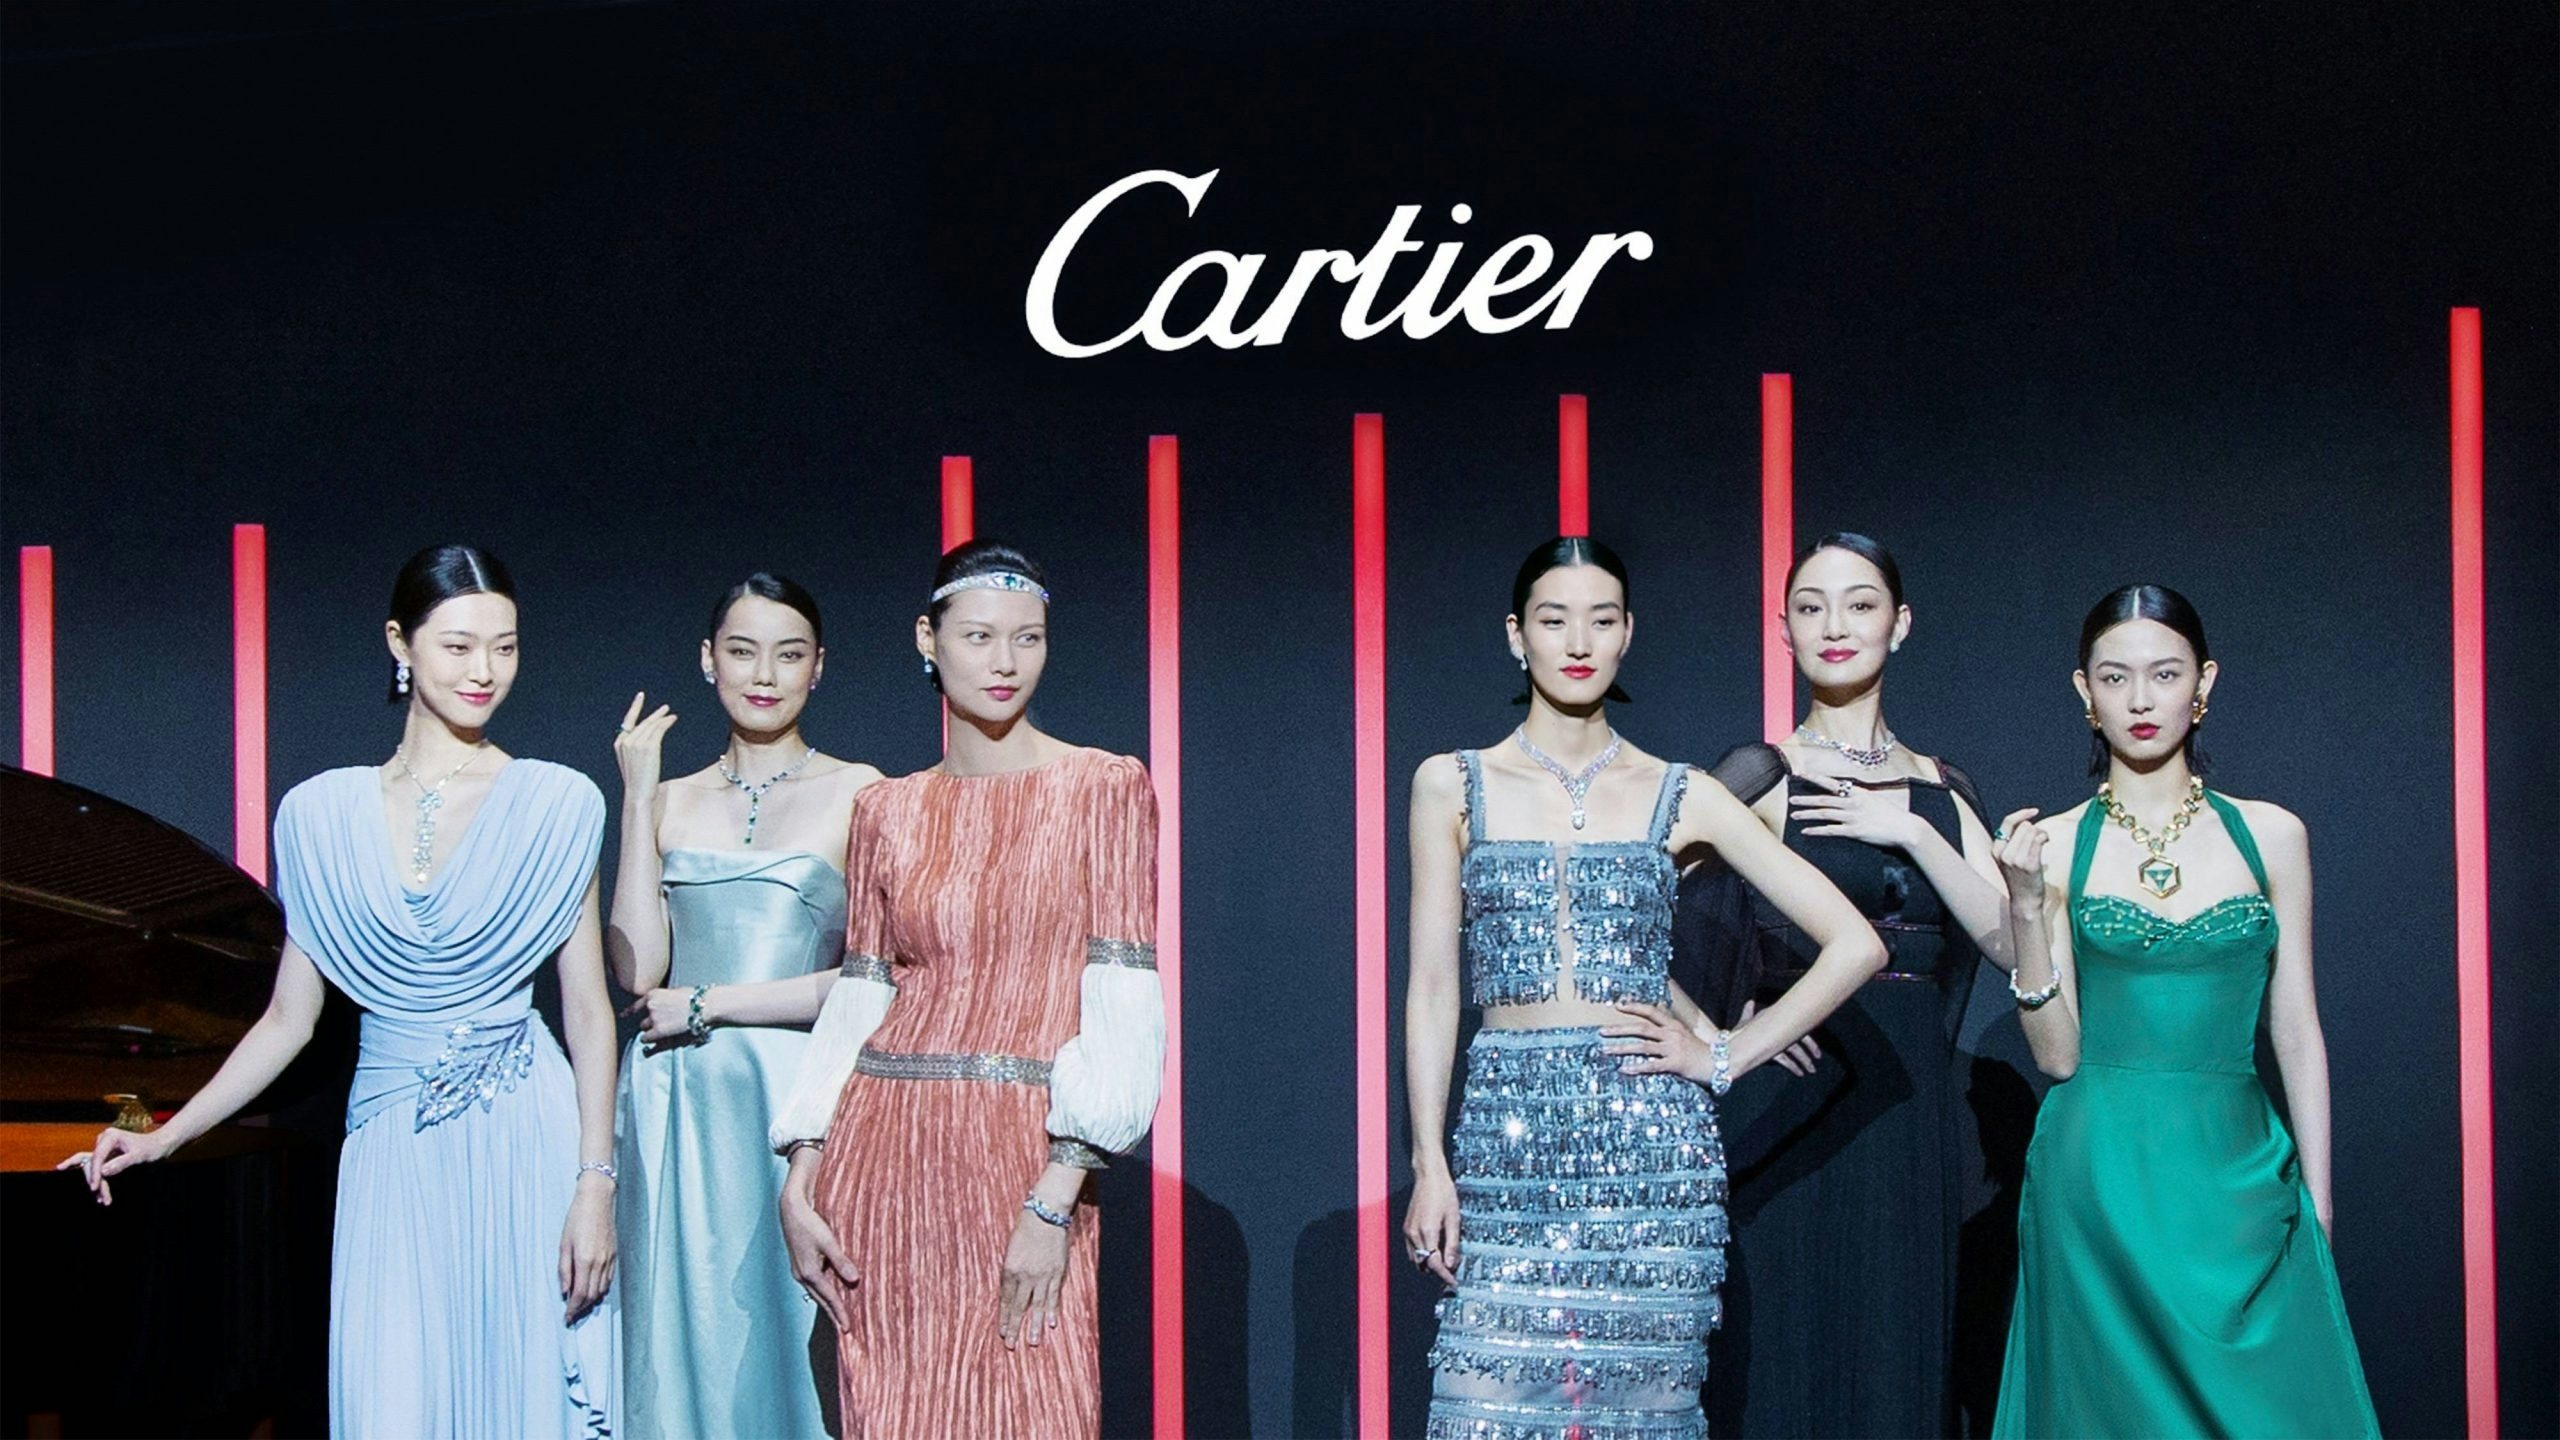 The pandemic has made jewelry more dominant while reshuffling Richemont’s regional mix, growing the Asia Pacific larger than Europe and the Americas combined. Photo: Cartier's Weibo